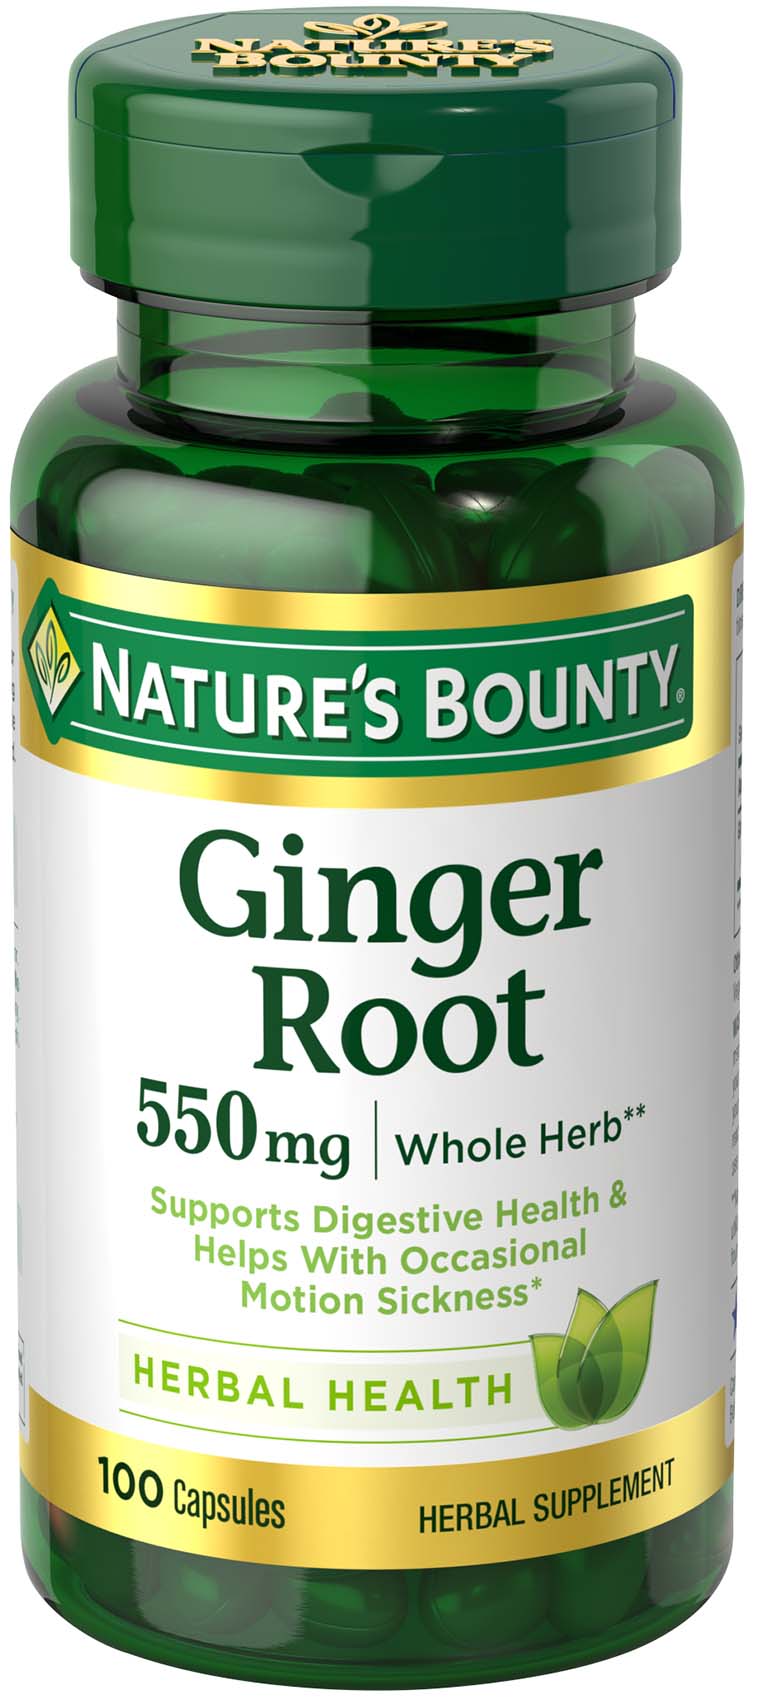 Nature's Bounty Ginger Root Capsules, 550 Mg, 100 Ct - image 1 of 5